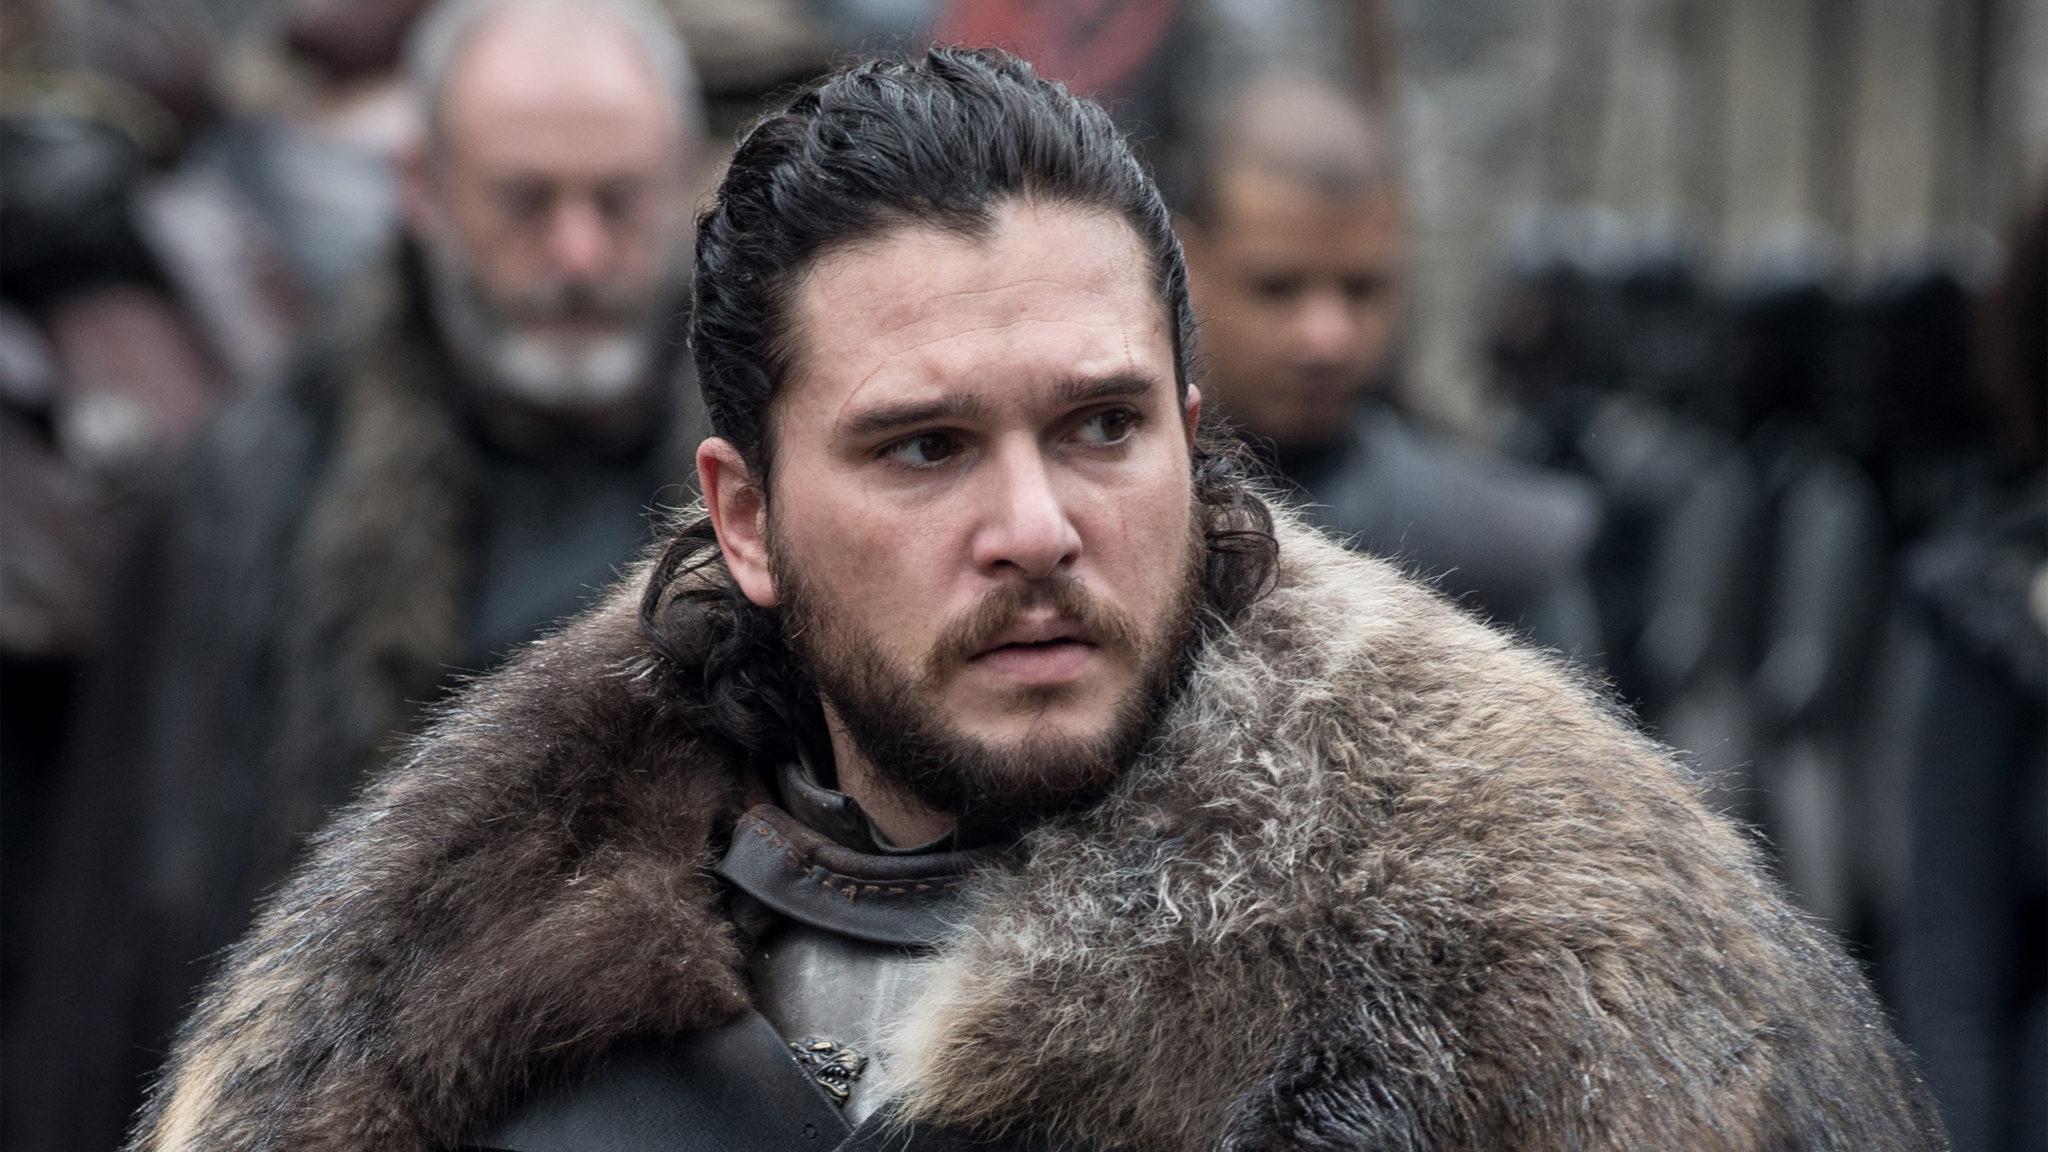 Epic Game of Thrones storylines like Stark bastard Jon Snow's have played a role in The Mandalorian's new plots.